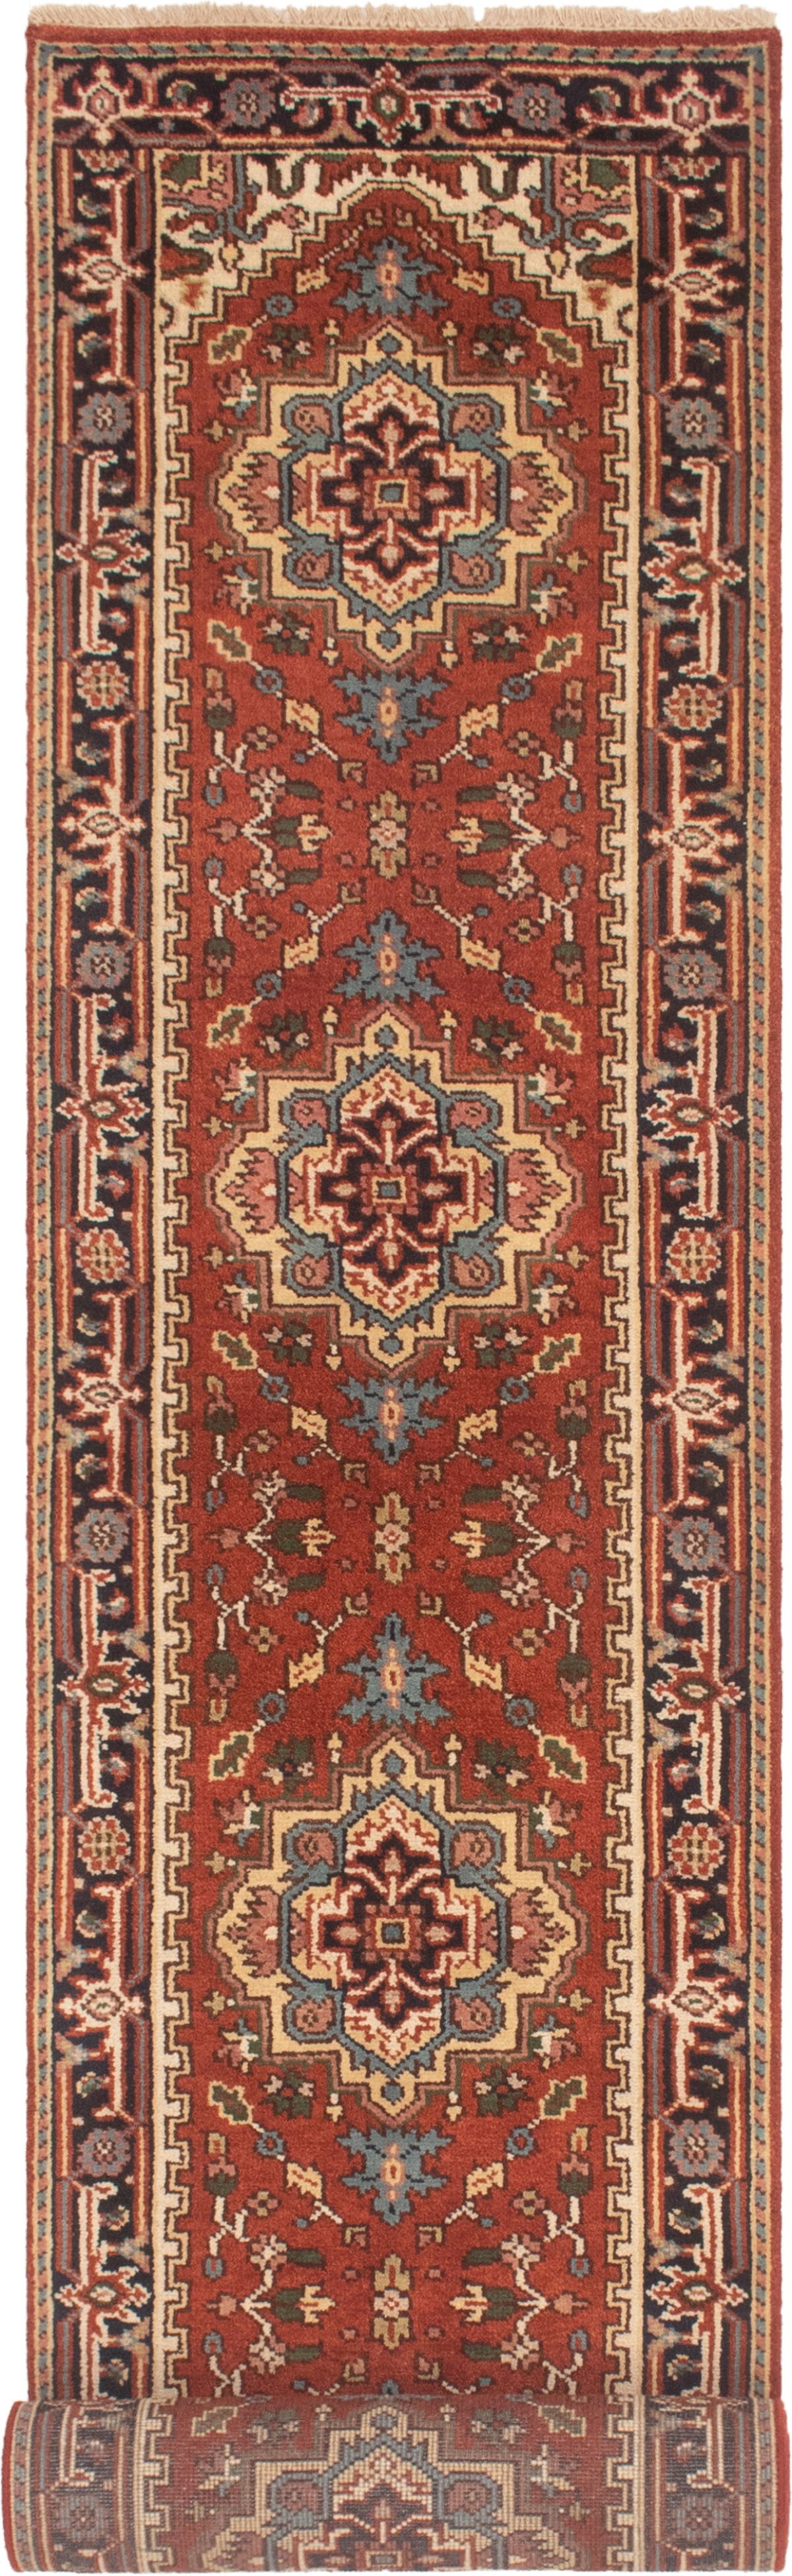 Hand-knotted Serapi Heritage Dark Copper Wool Rug 2'6" x 15'11"  Size: 2'6" x 15'11"  